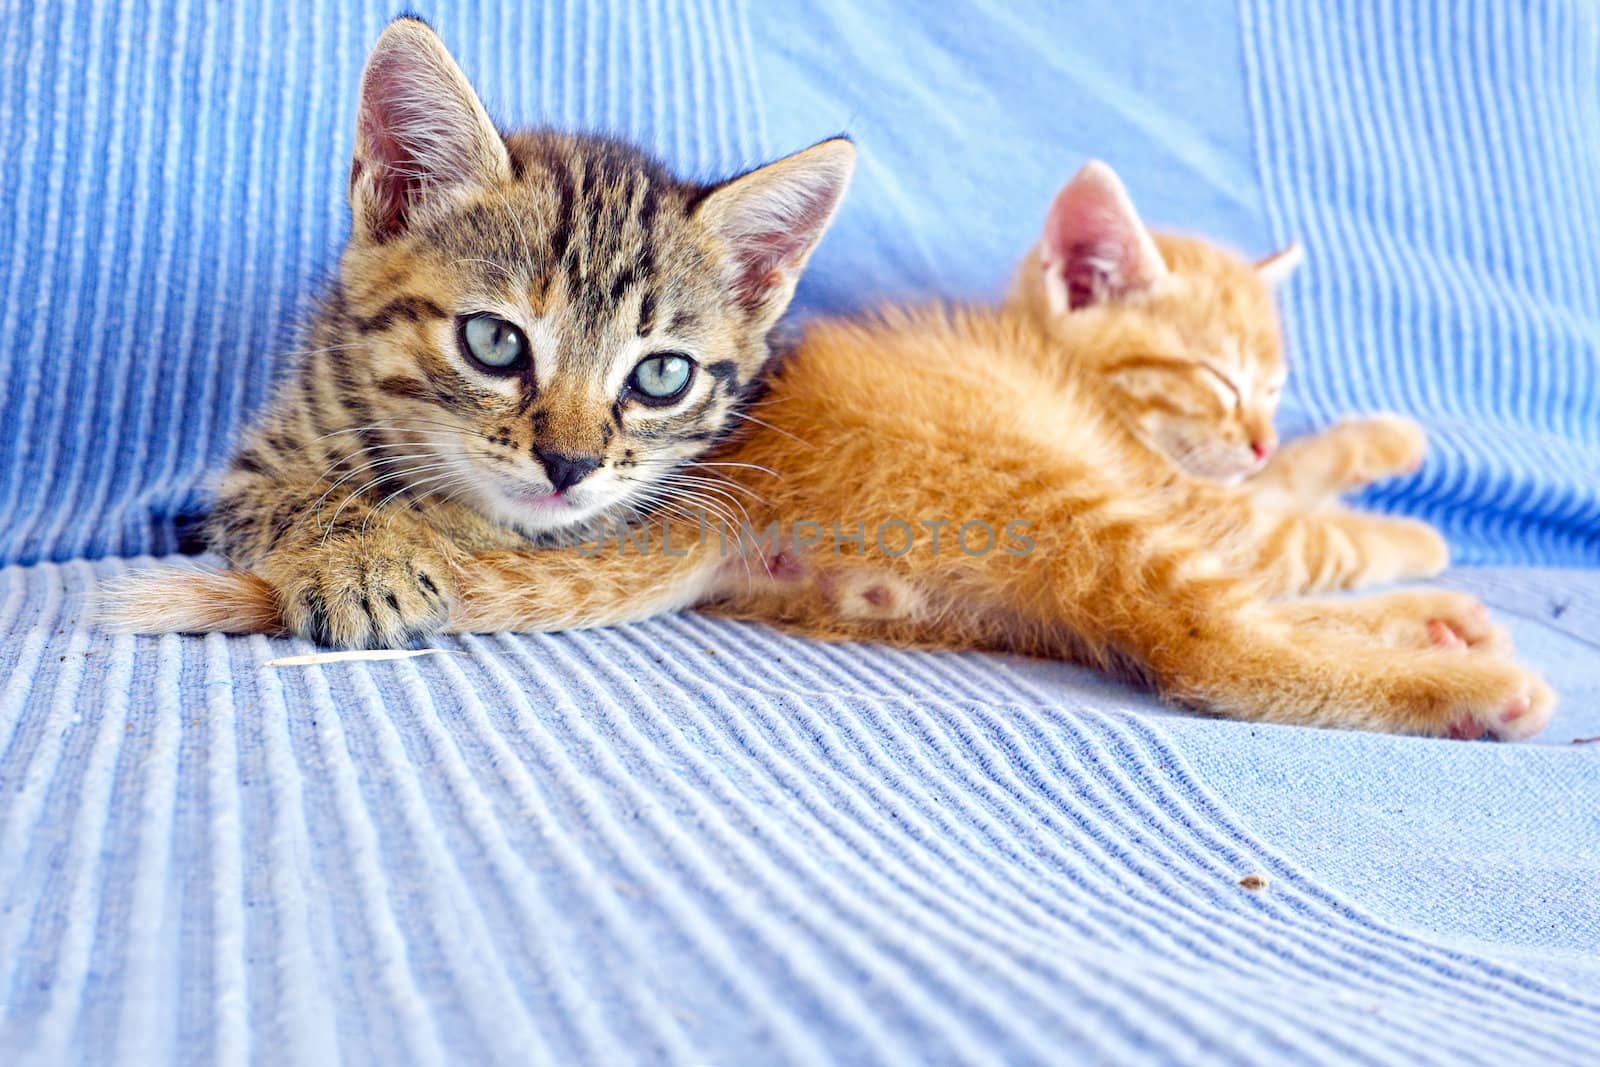 Little kittens on a couch